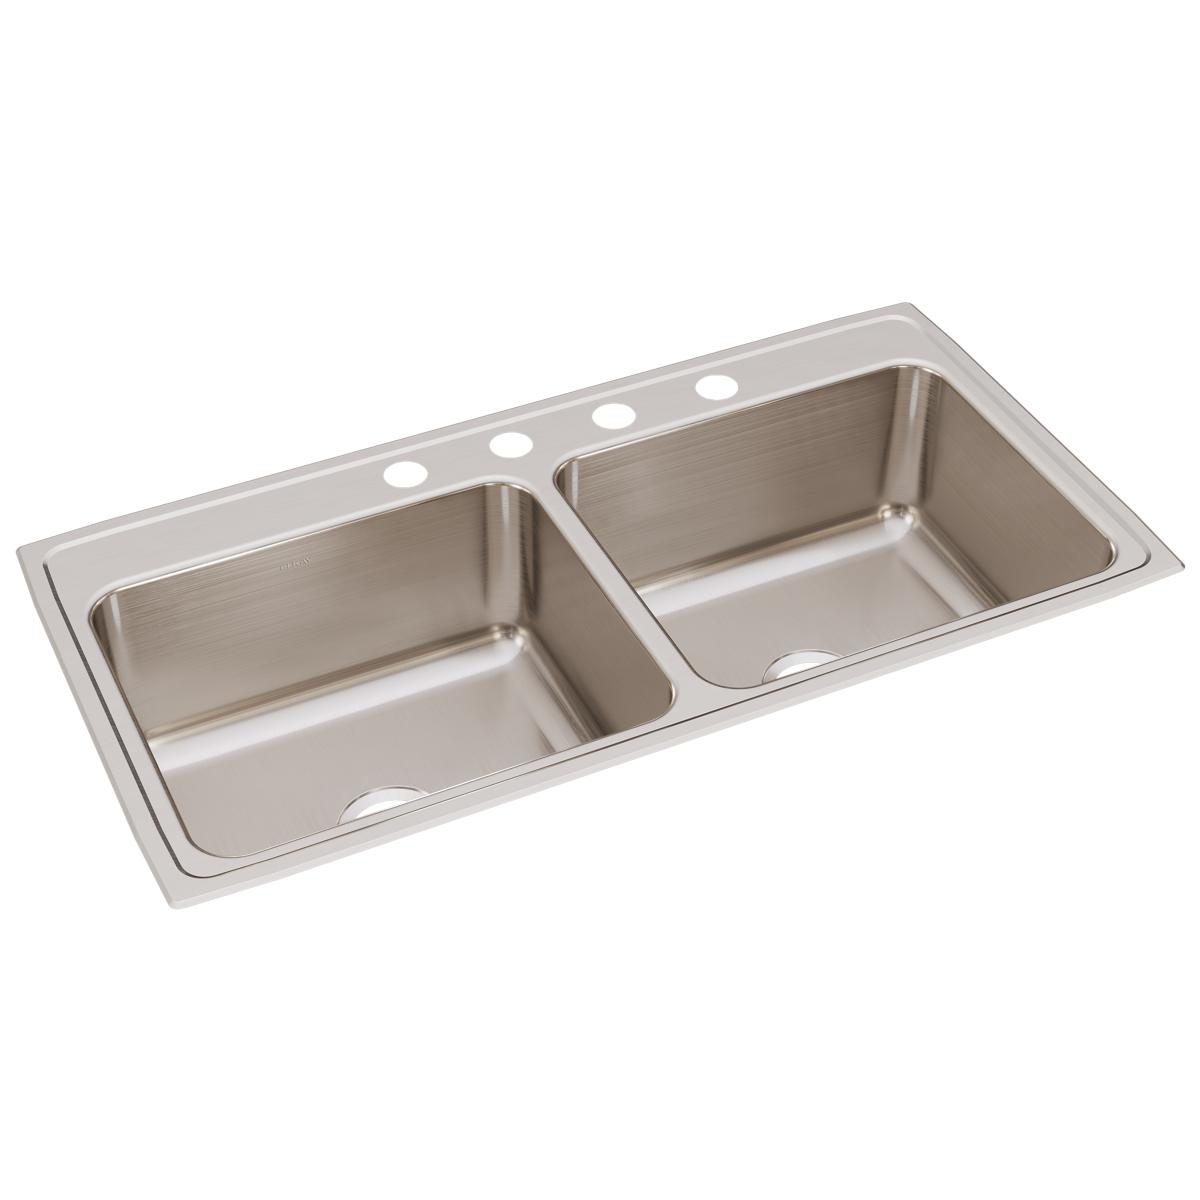 Elkay Lustertone Classic Stainless Steel 43" x 22" x 10-1/8" Equal Double Bowl Drop-in Sink